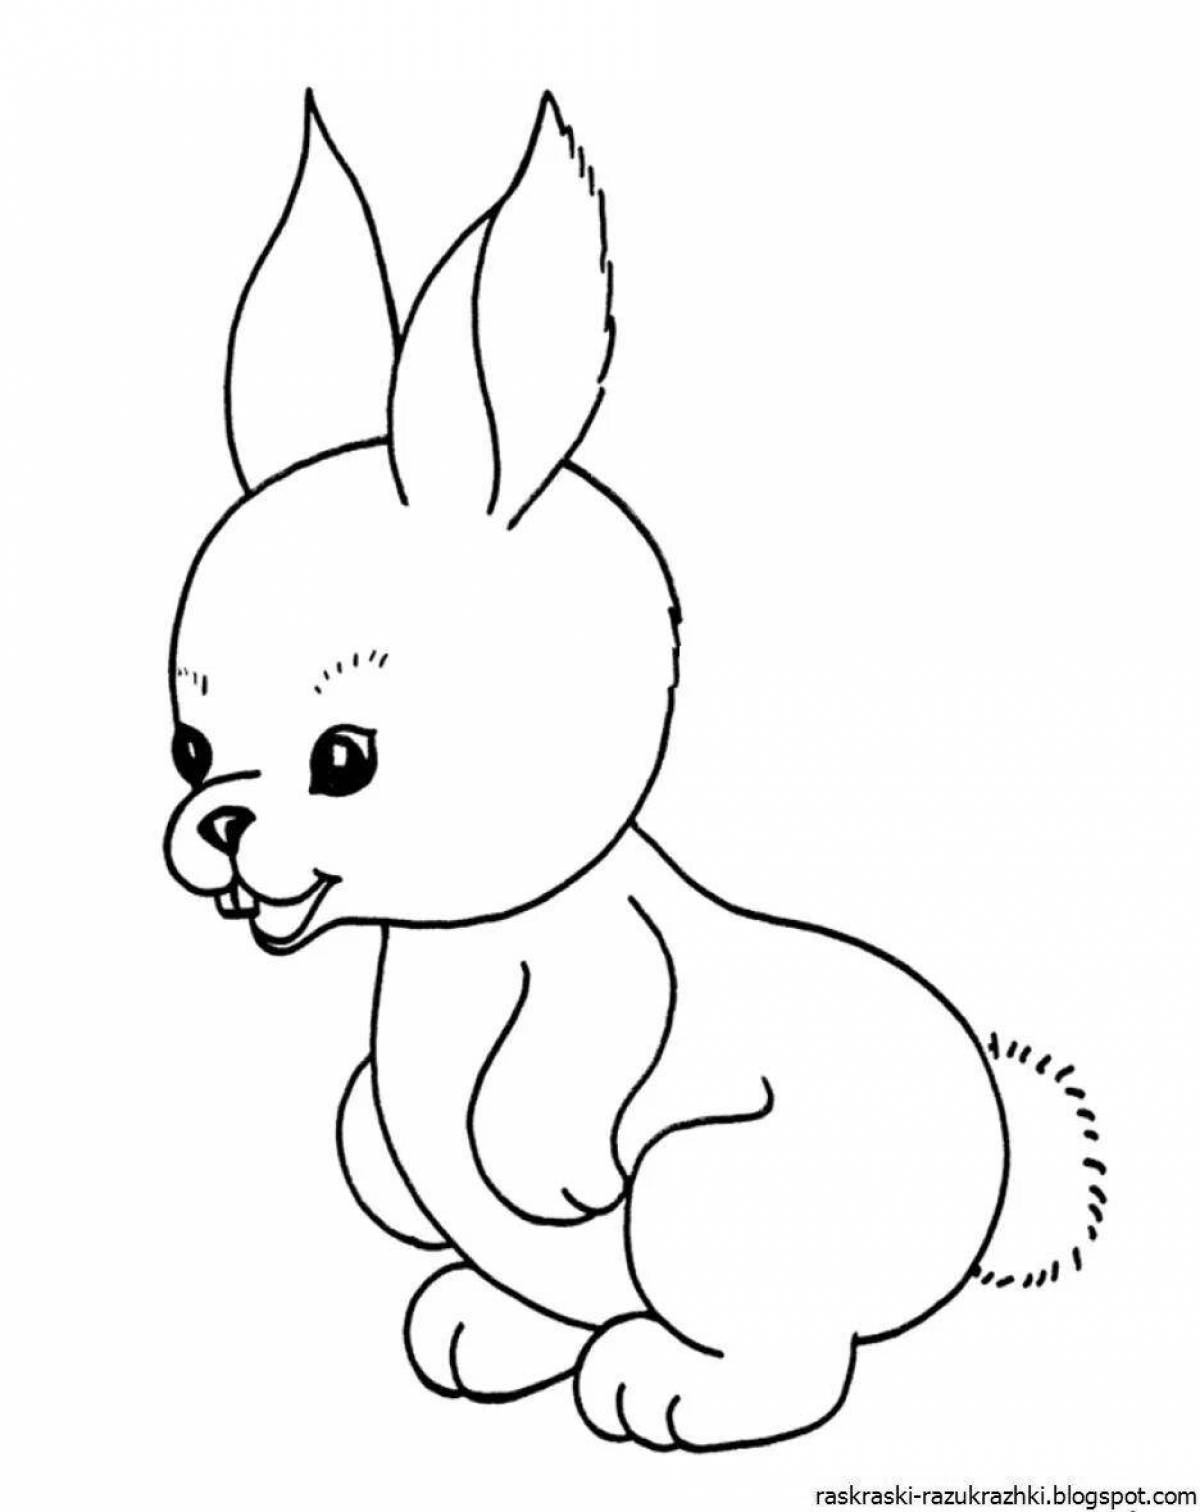 Snuggable coloring page bunny for kids